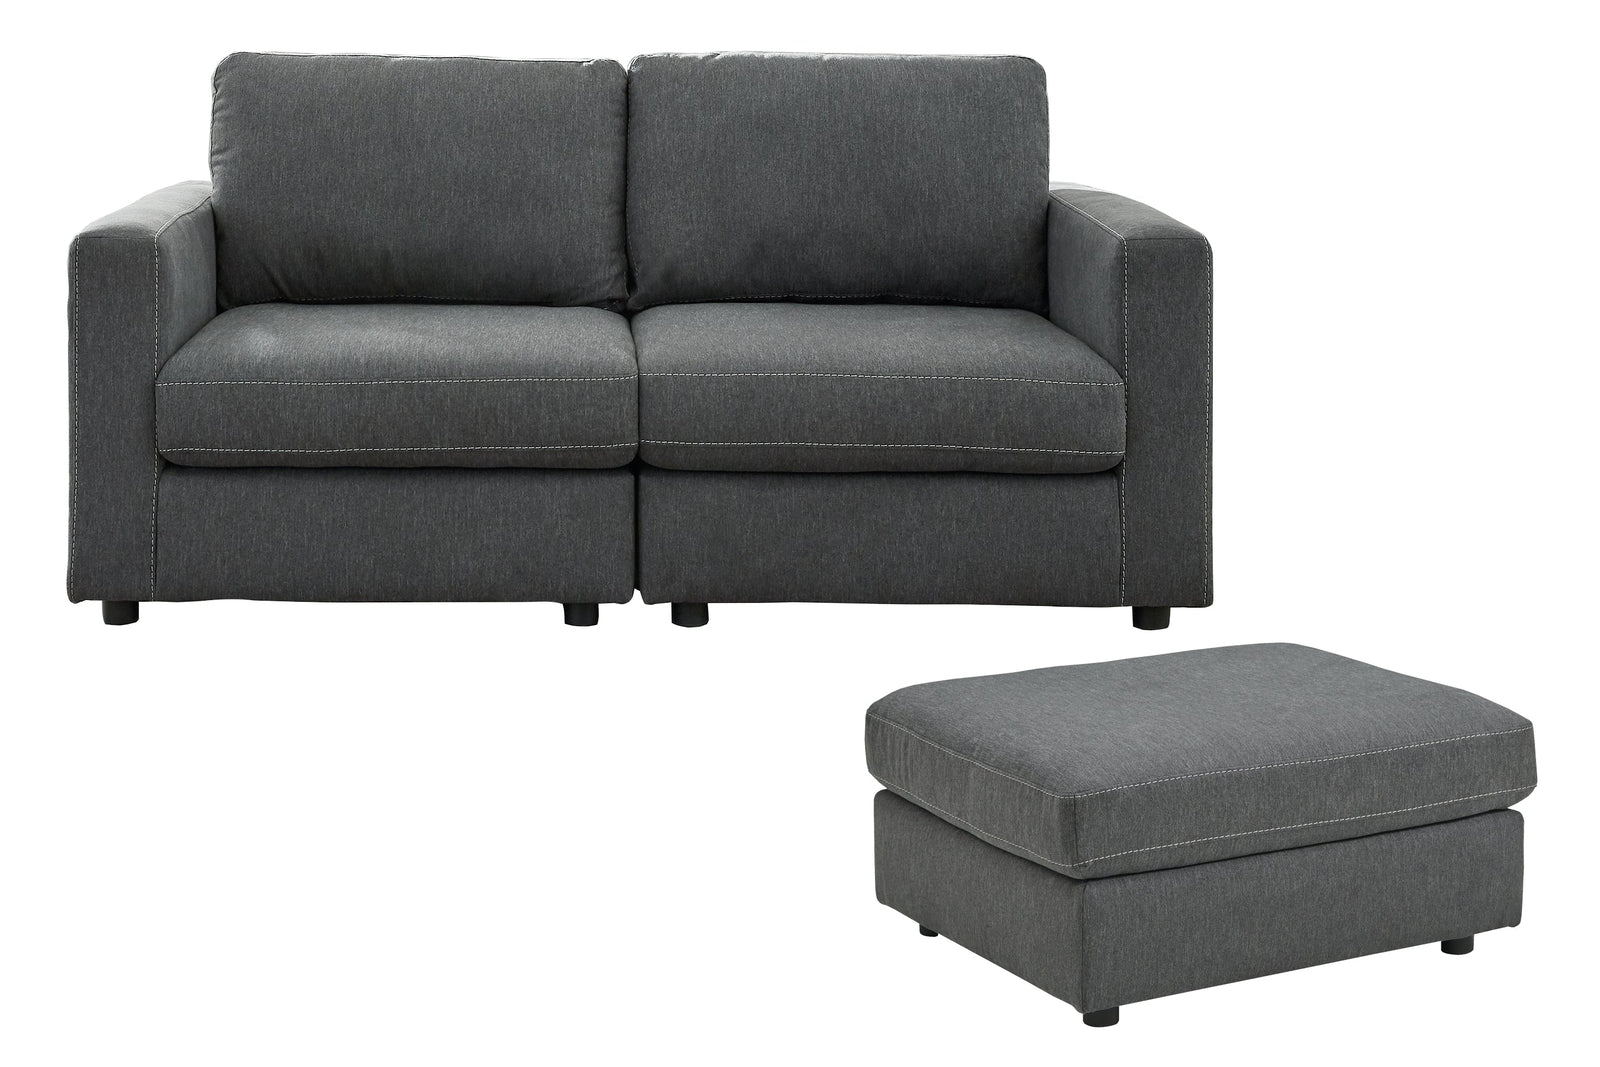 Candela Charcoal 2-Piece Sectional With Ottoman